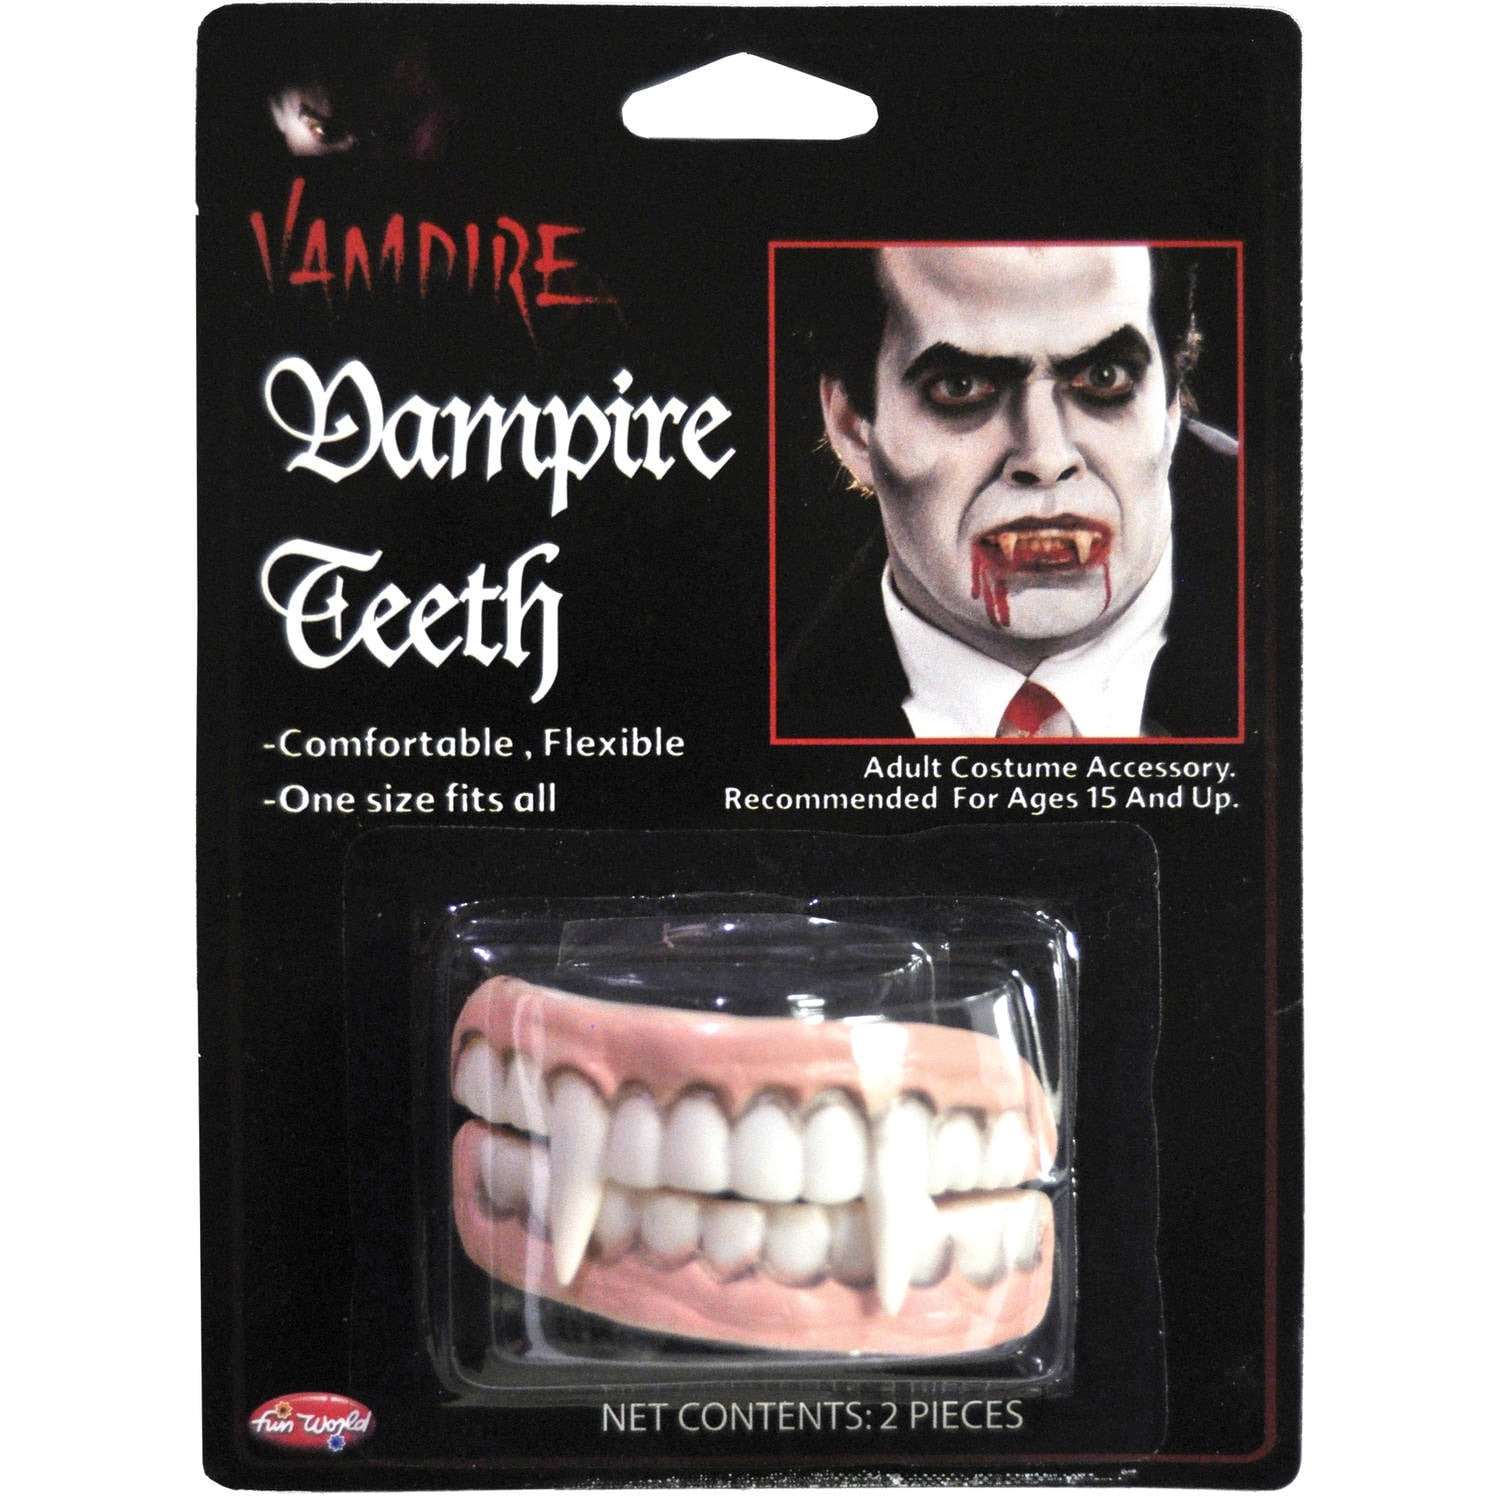 Adult Vampire Fangs Zombie Teeth Tooth Halloween Cosplay Props Costume Accessory 